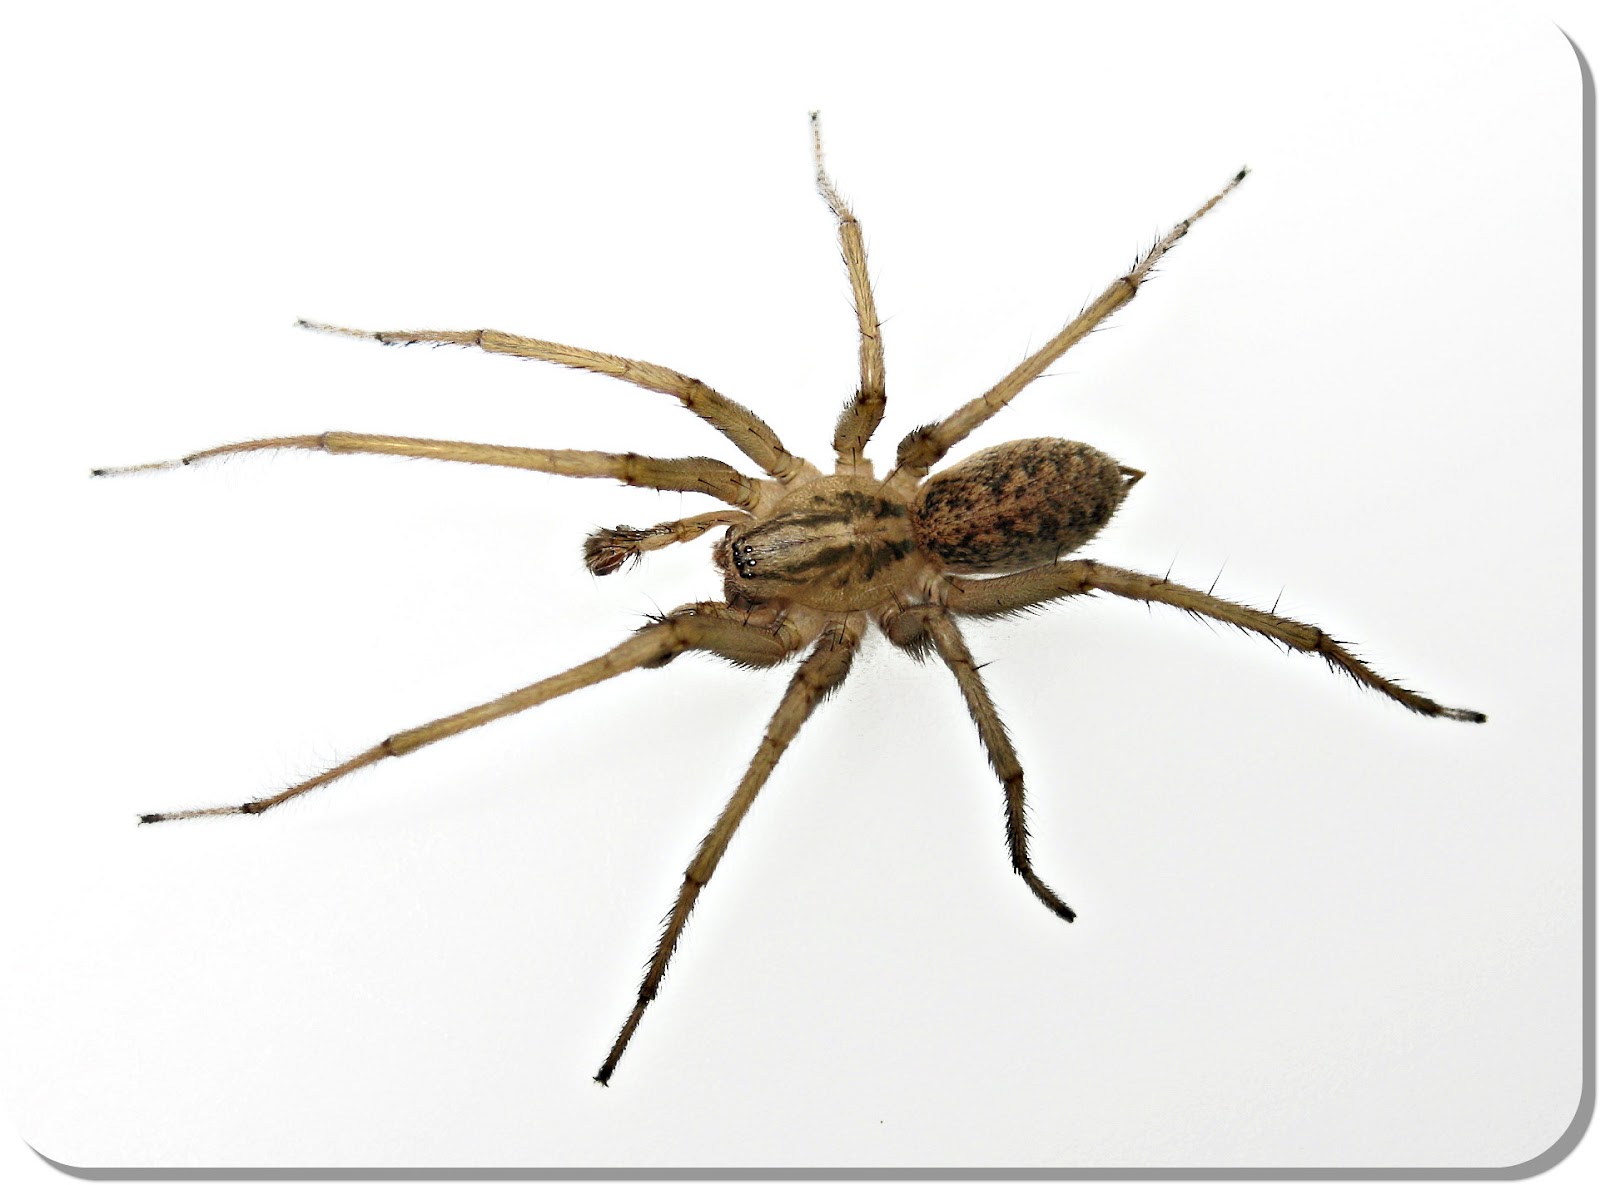 The Brown Recluse Spider The Legend Of